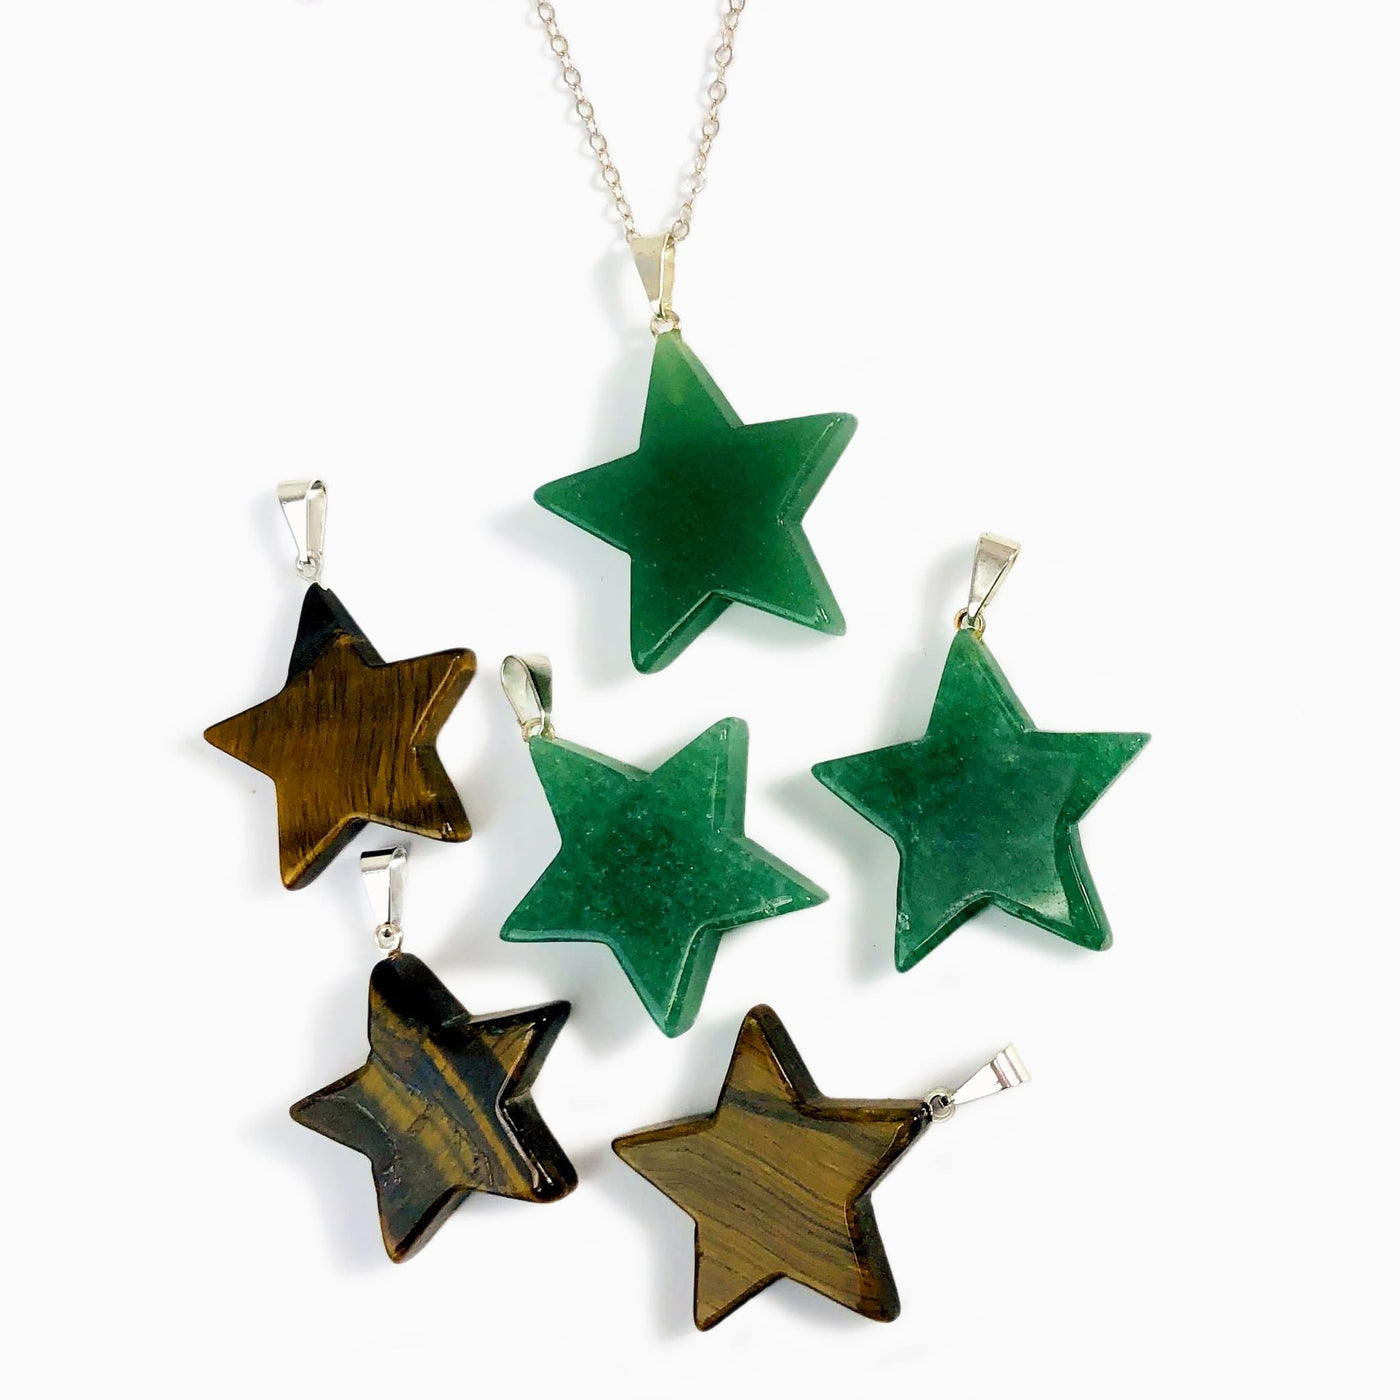 star pendants available in tigers eye and green quartz 